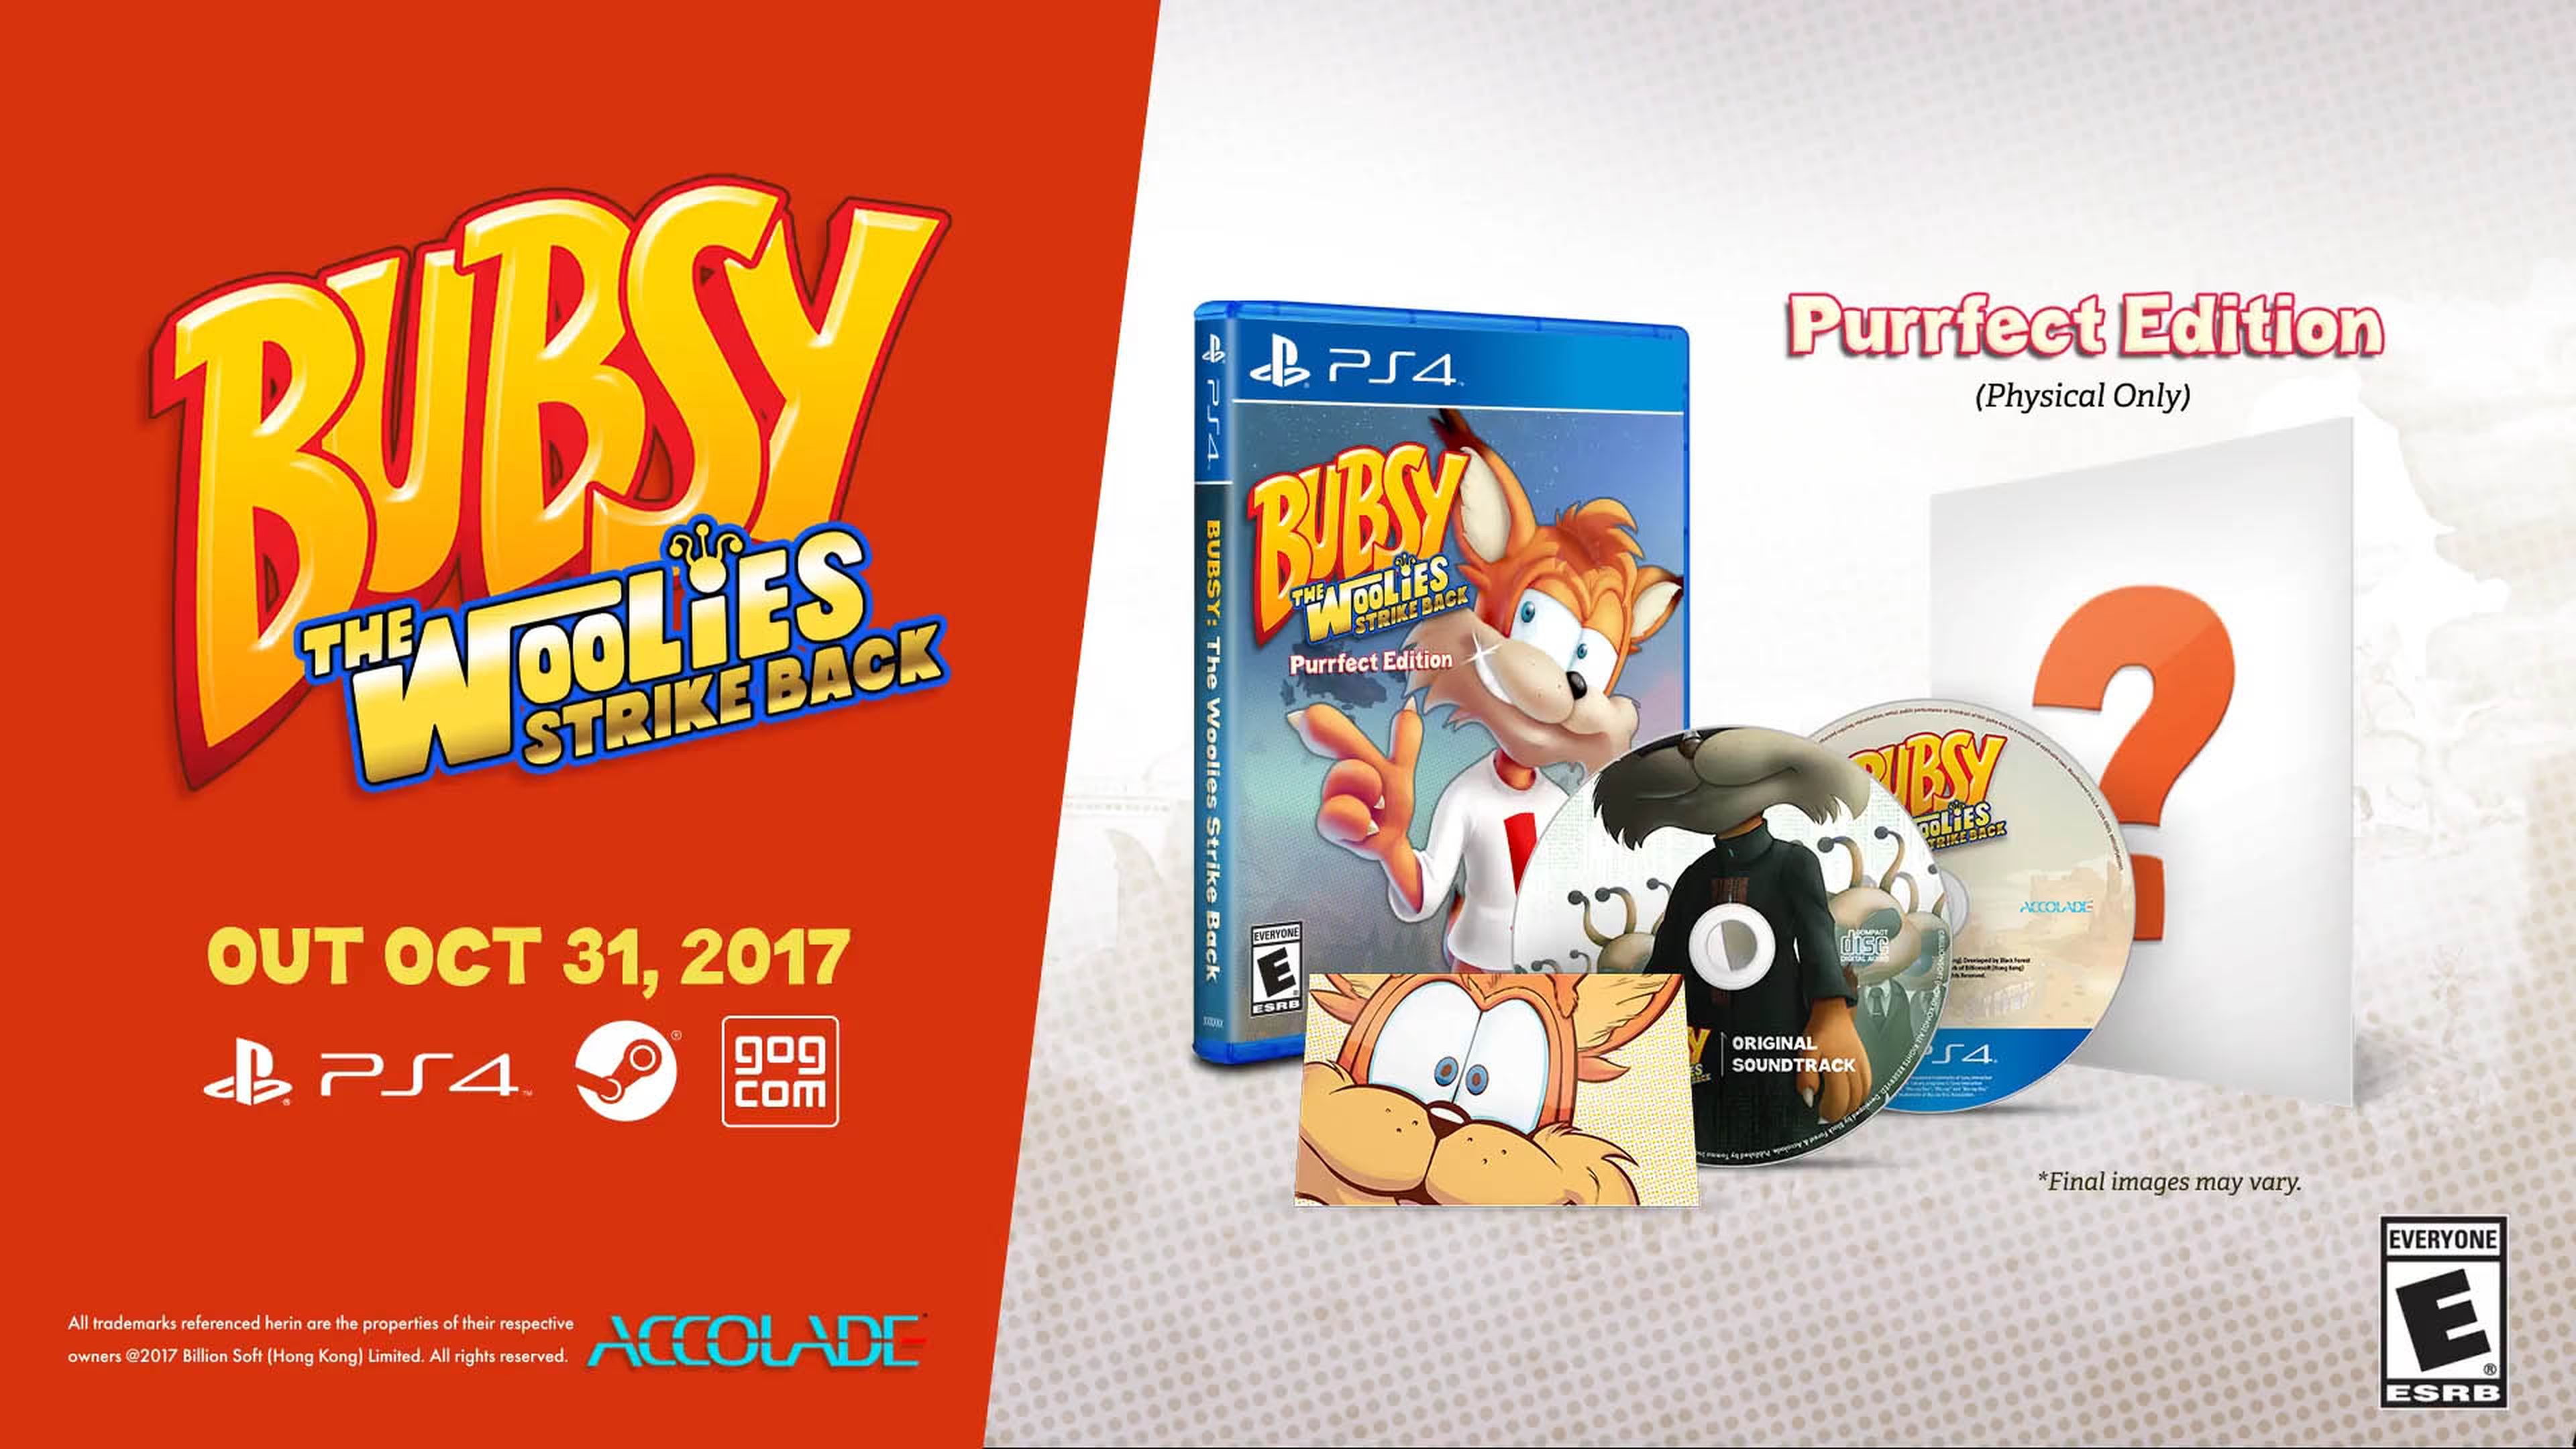 Bubsy The Woolies Strike Back para PS4 y PC